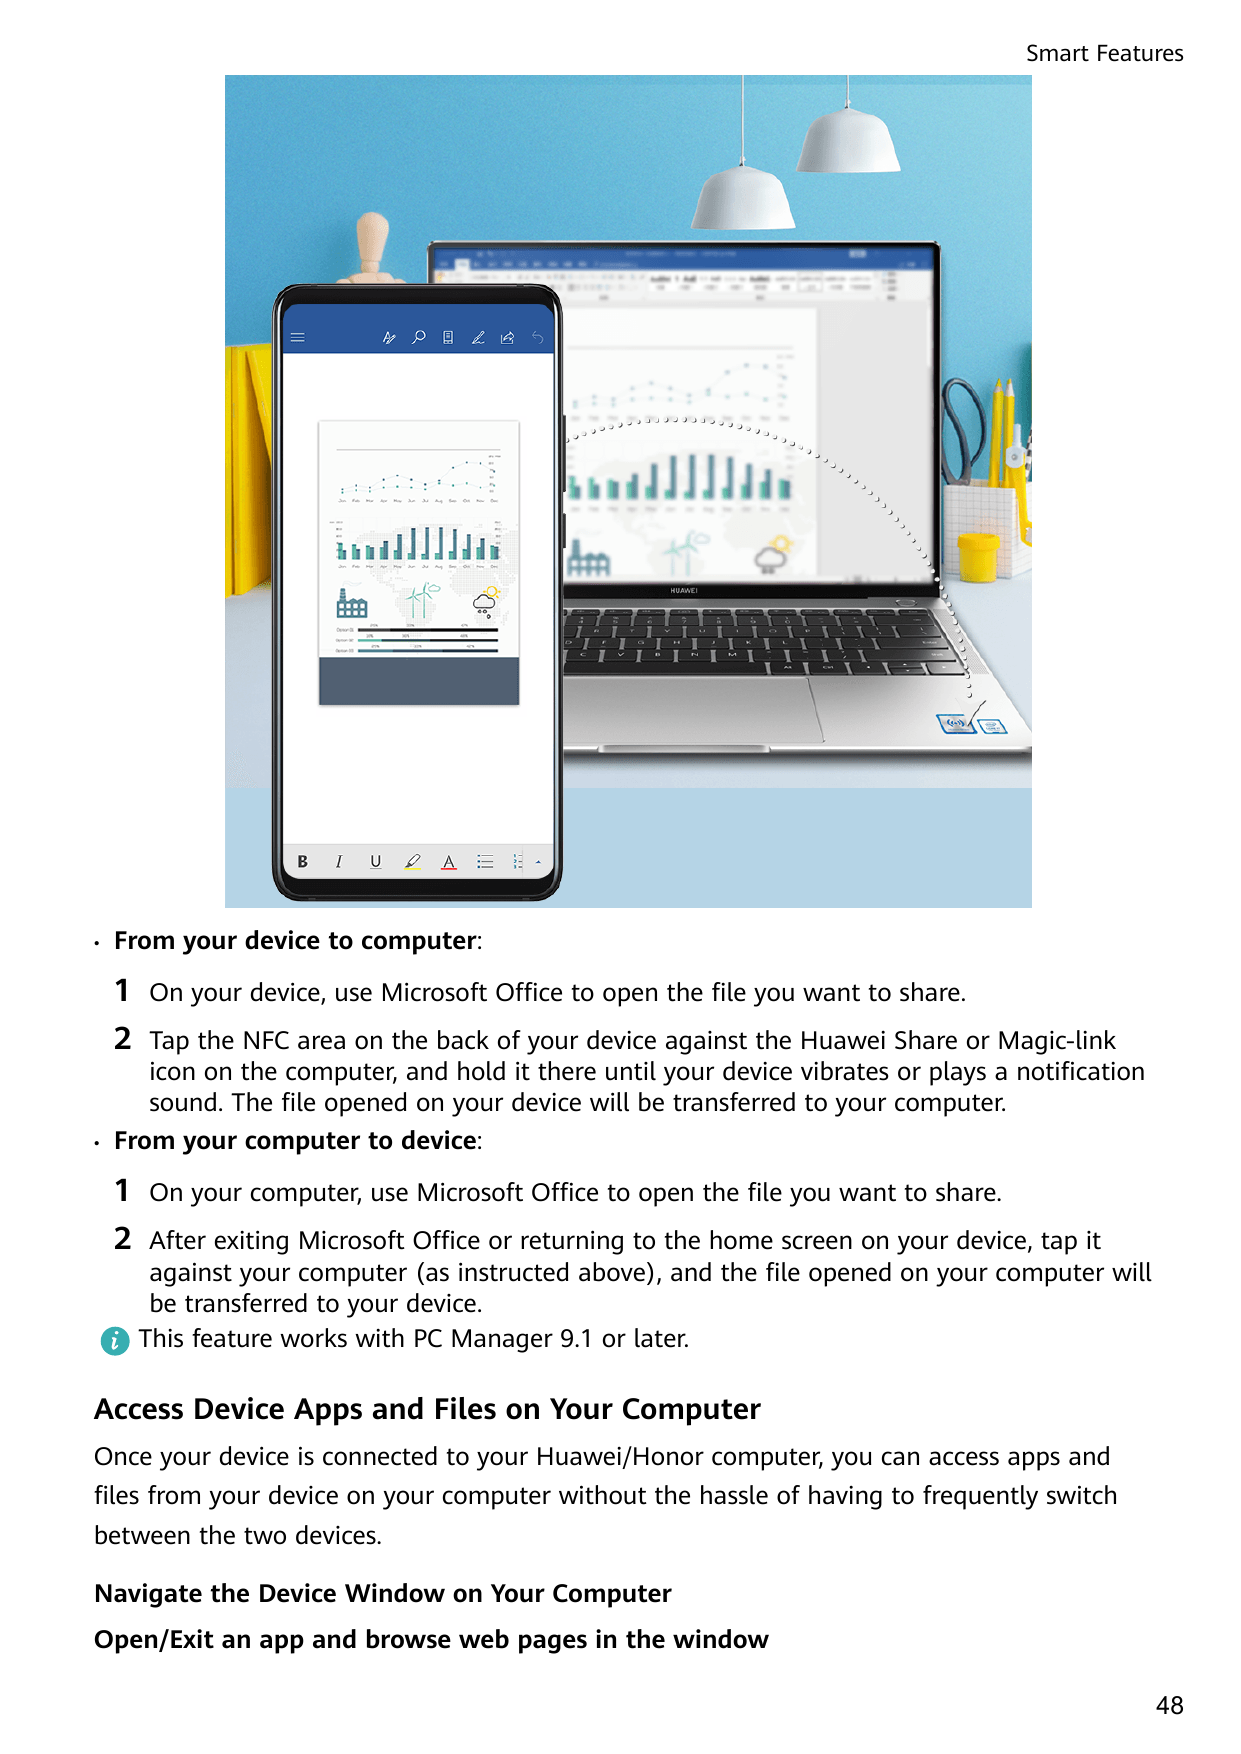 Smart Features•From your device to computer:1On your device, use Microsoft Office to open the file you want to share.2•Tap the N